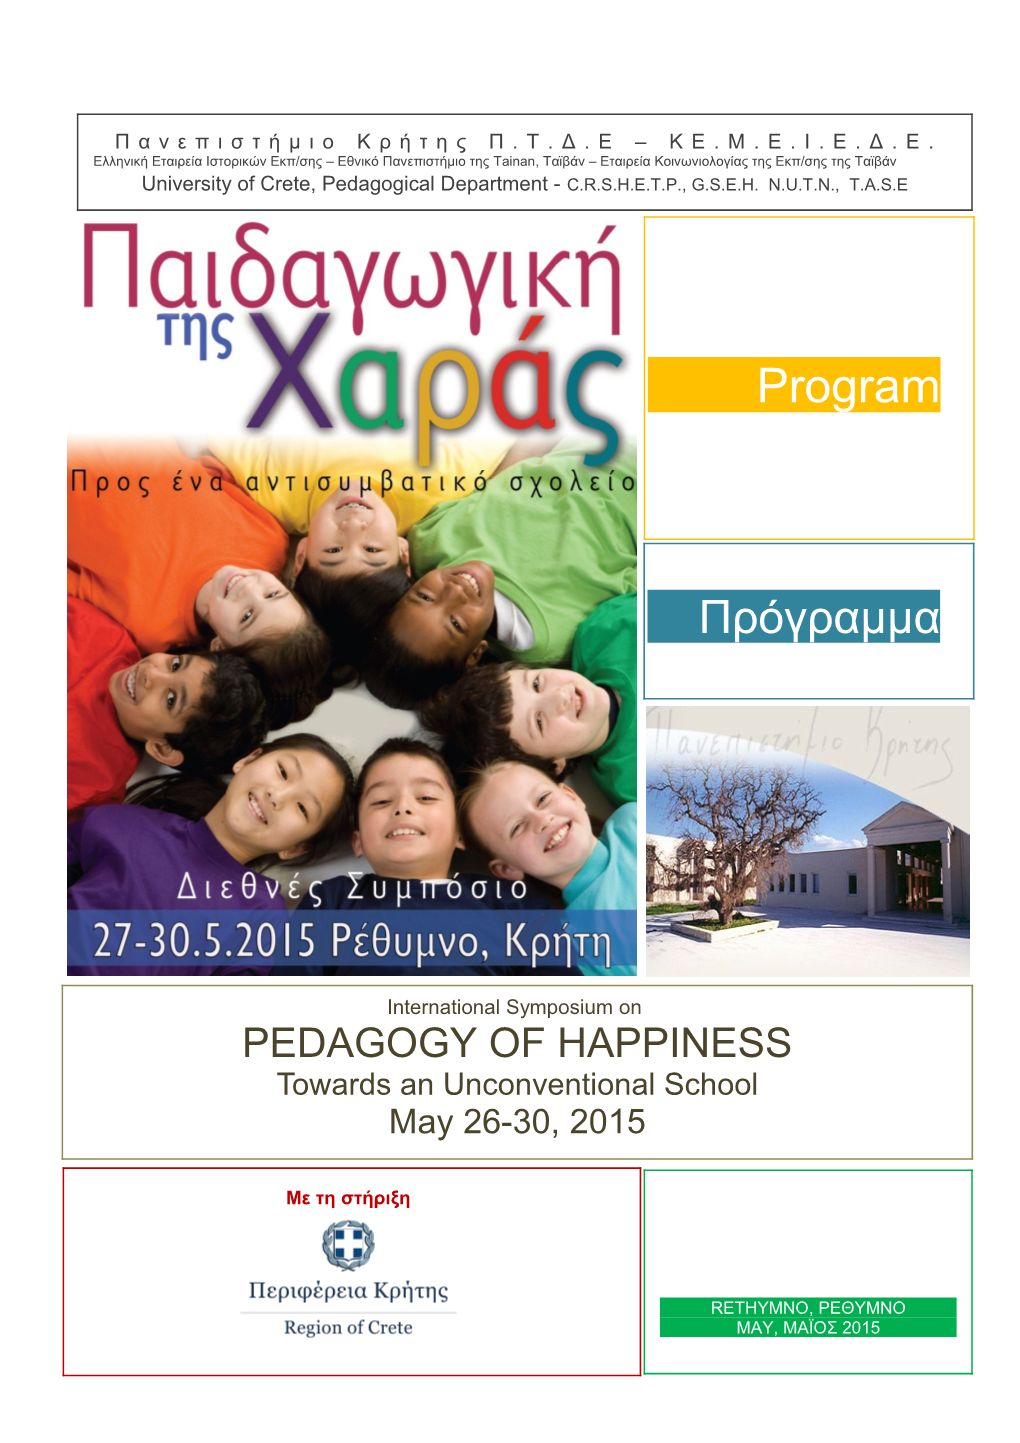 International Symposium on Pedagogy of Happiness. Towards an Unconventional School, May